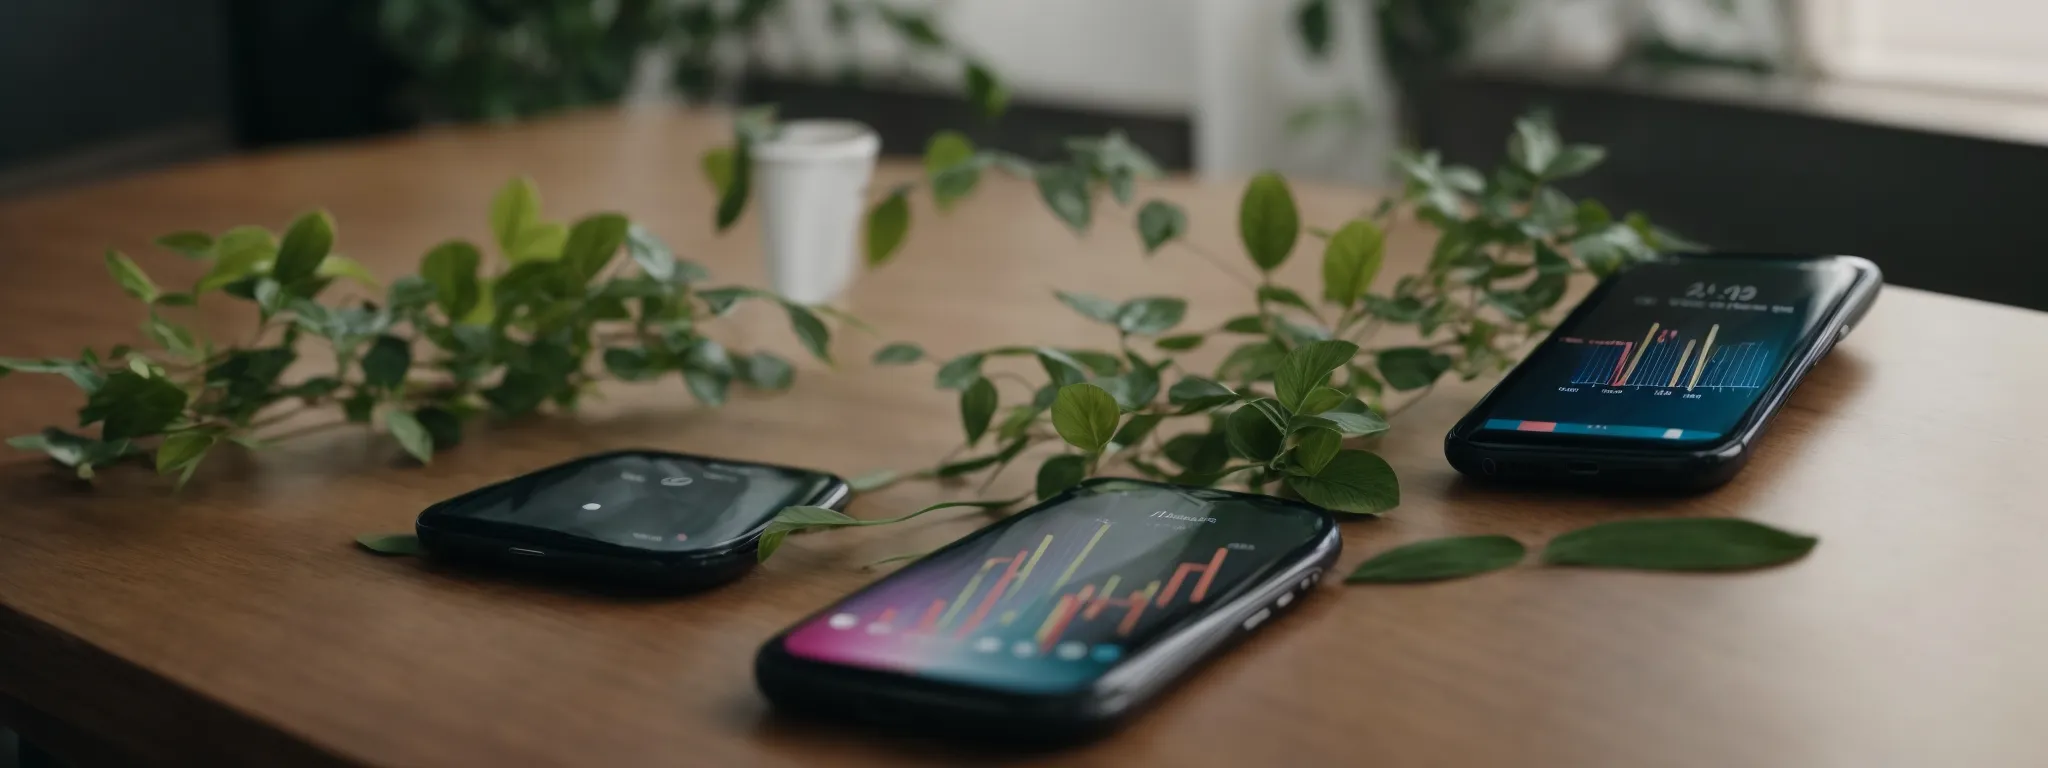 a smartphone displaying a colorful graph on its screen, resting on a table next to a plant.